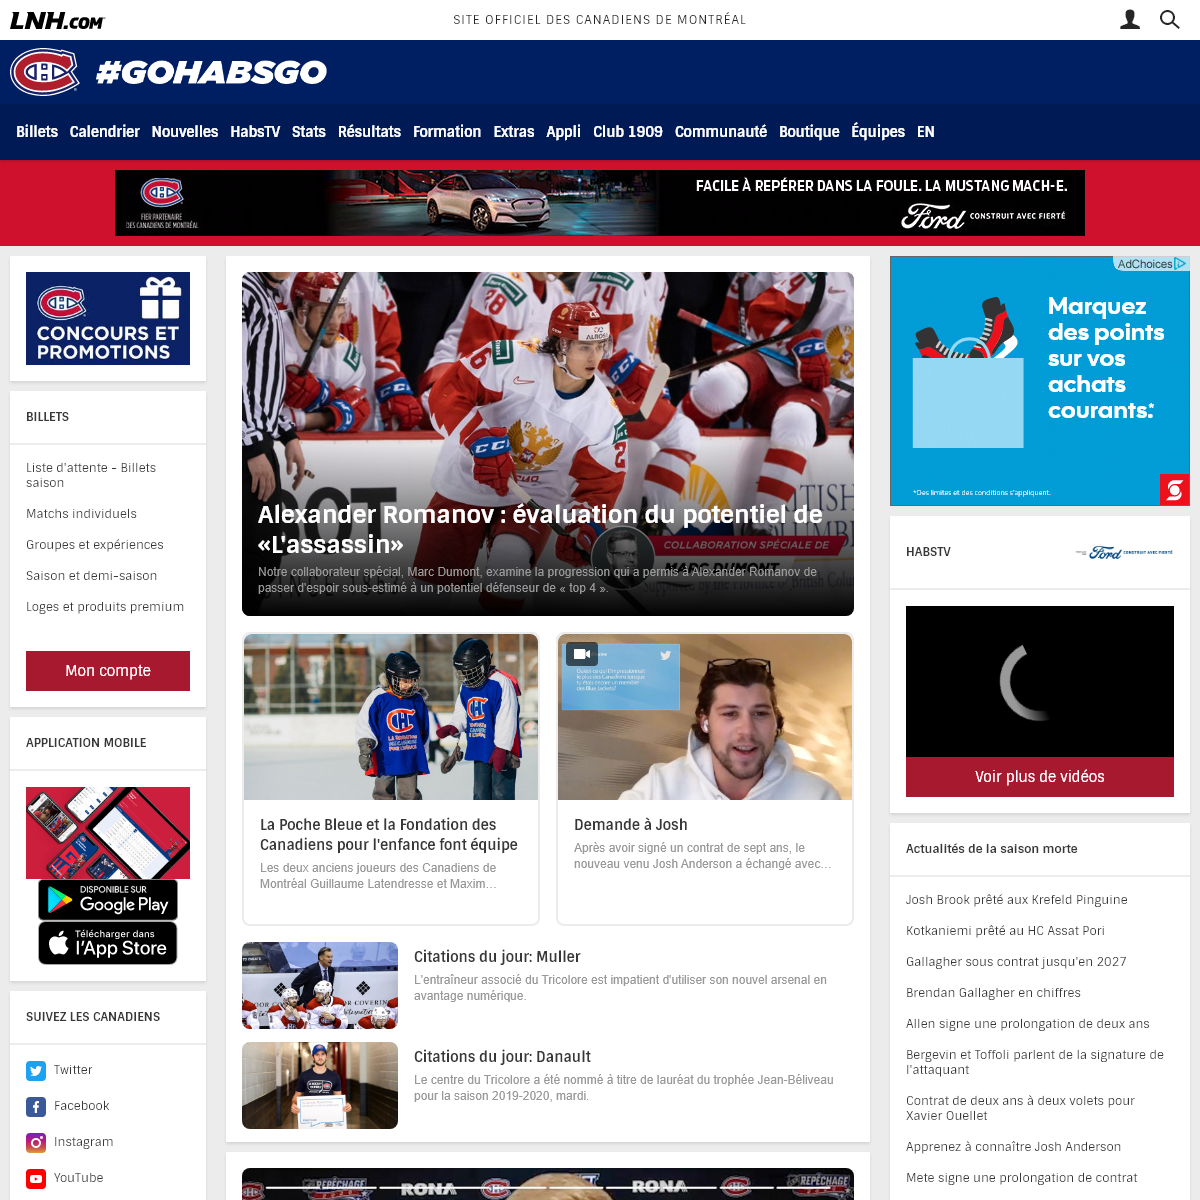 A complete backup of canadiens.com